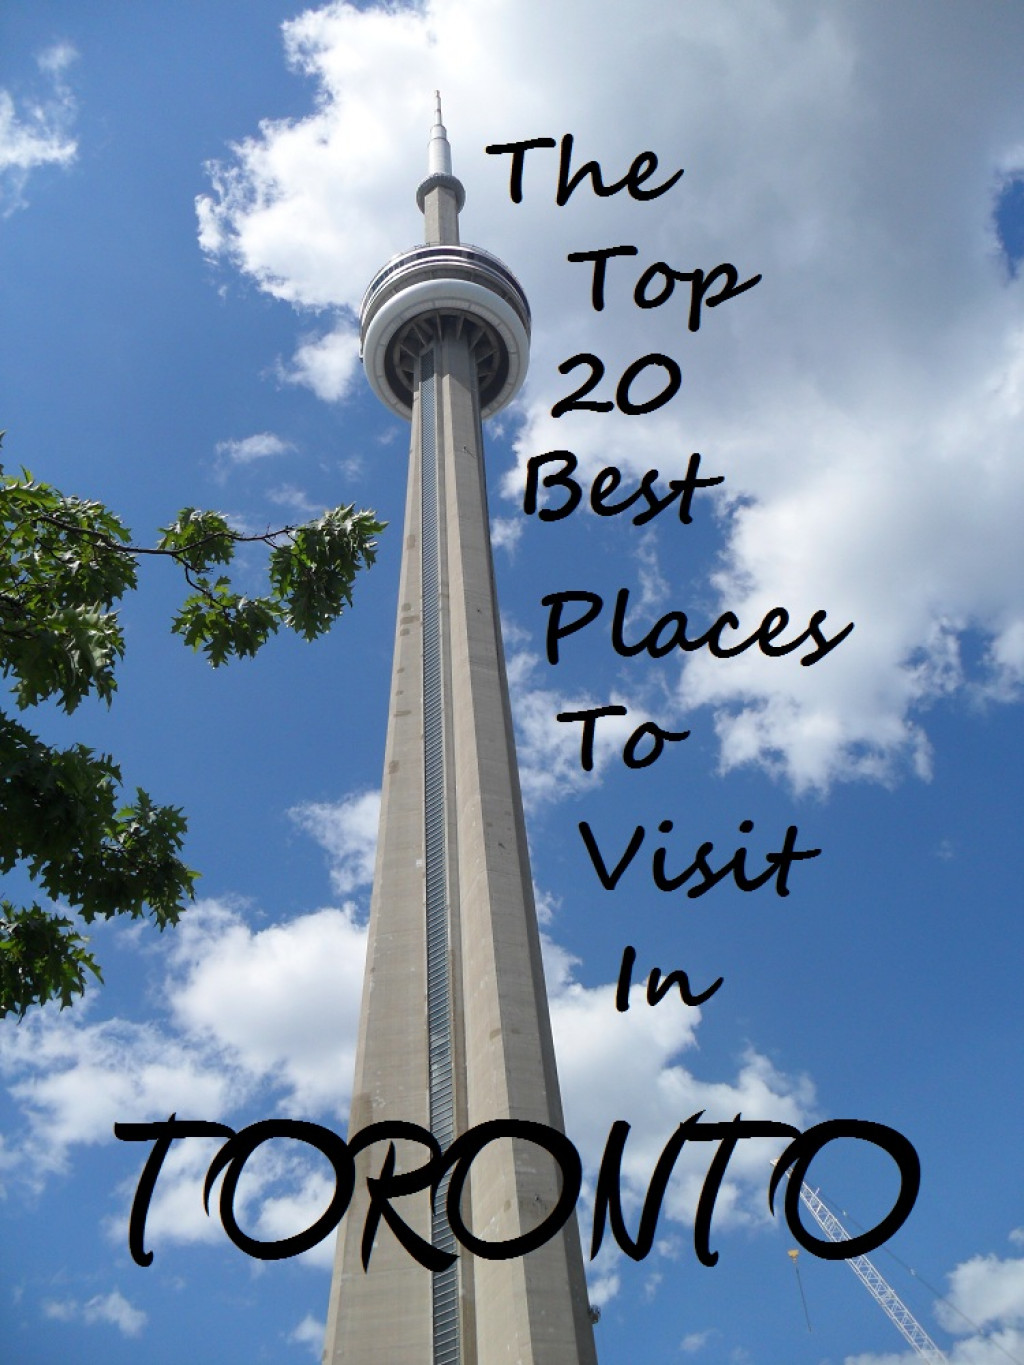 Top 20 Places To Visit In Toronto, Canada | HubPages